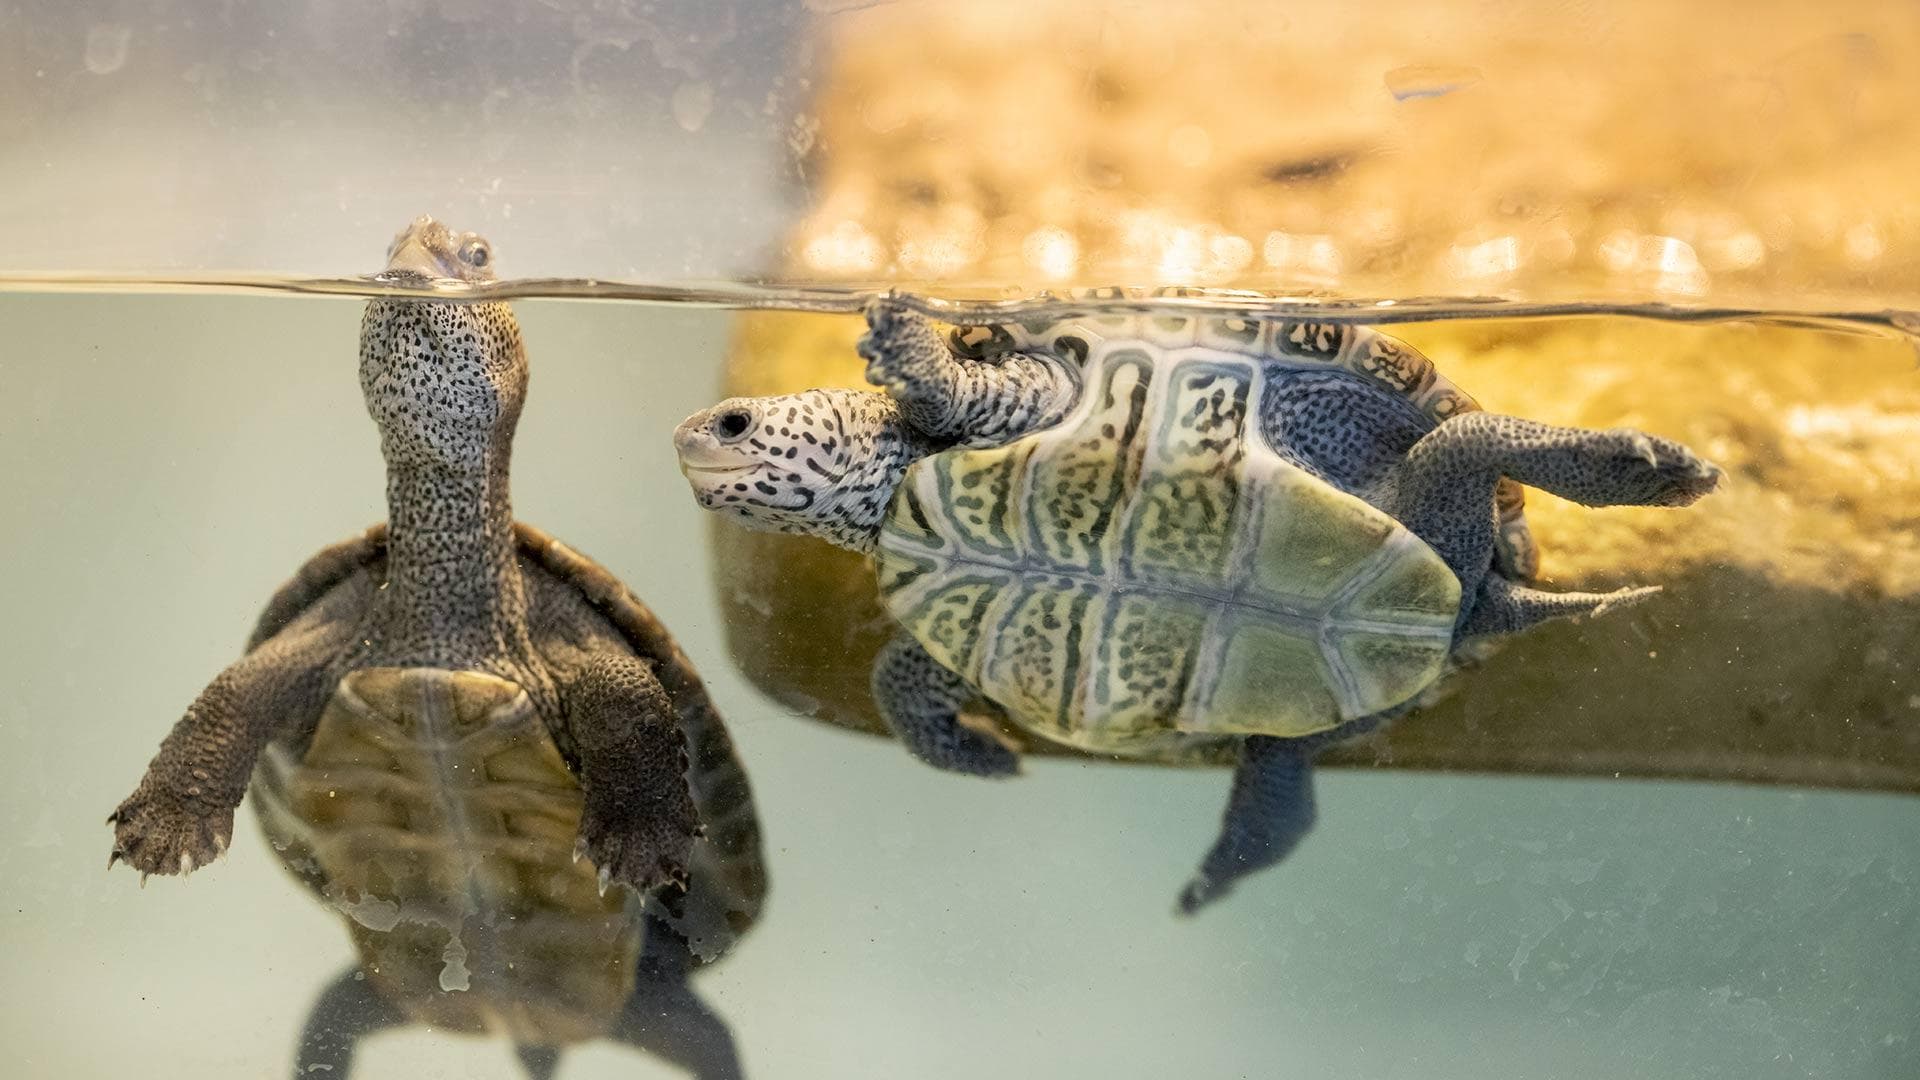 two baby terrapins